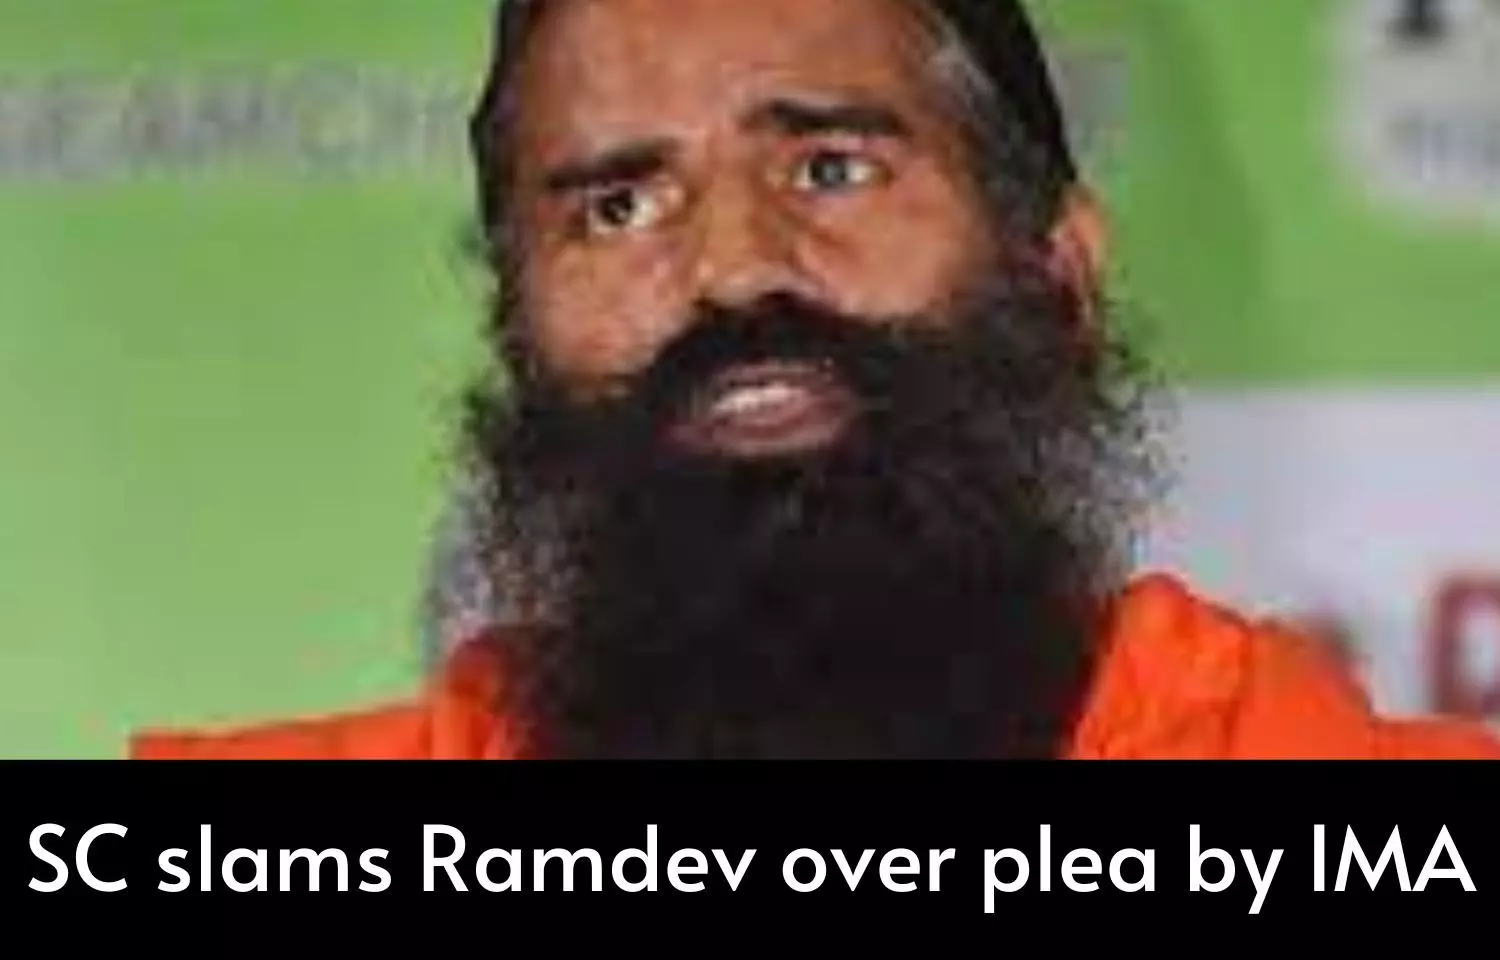 SC slams Ramdev over plea by IMA, says he shouldnt criticize other systems of medicine